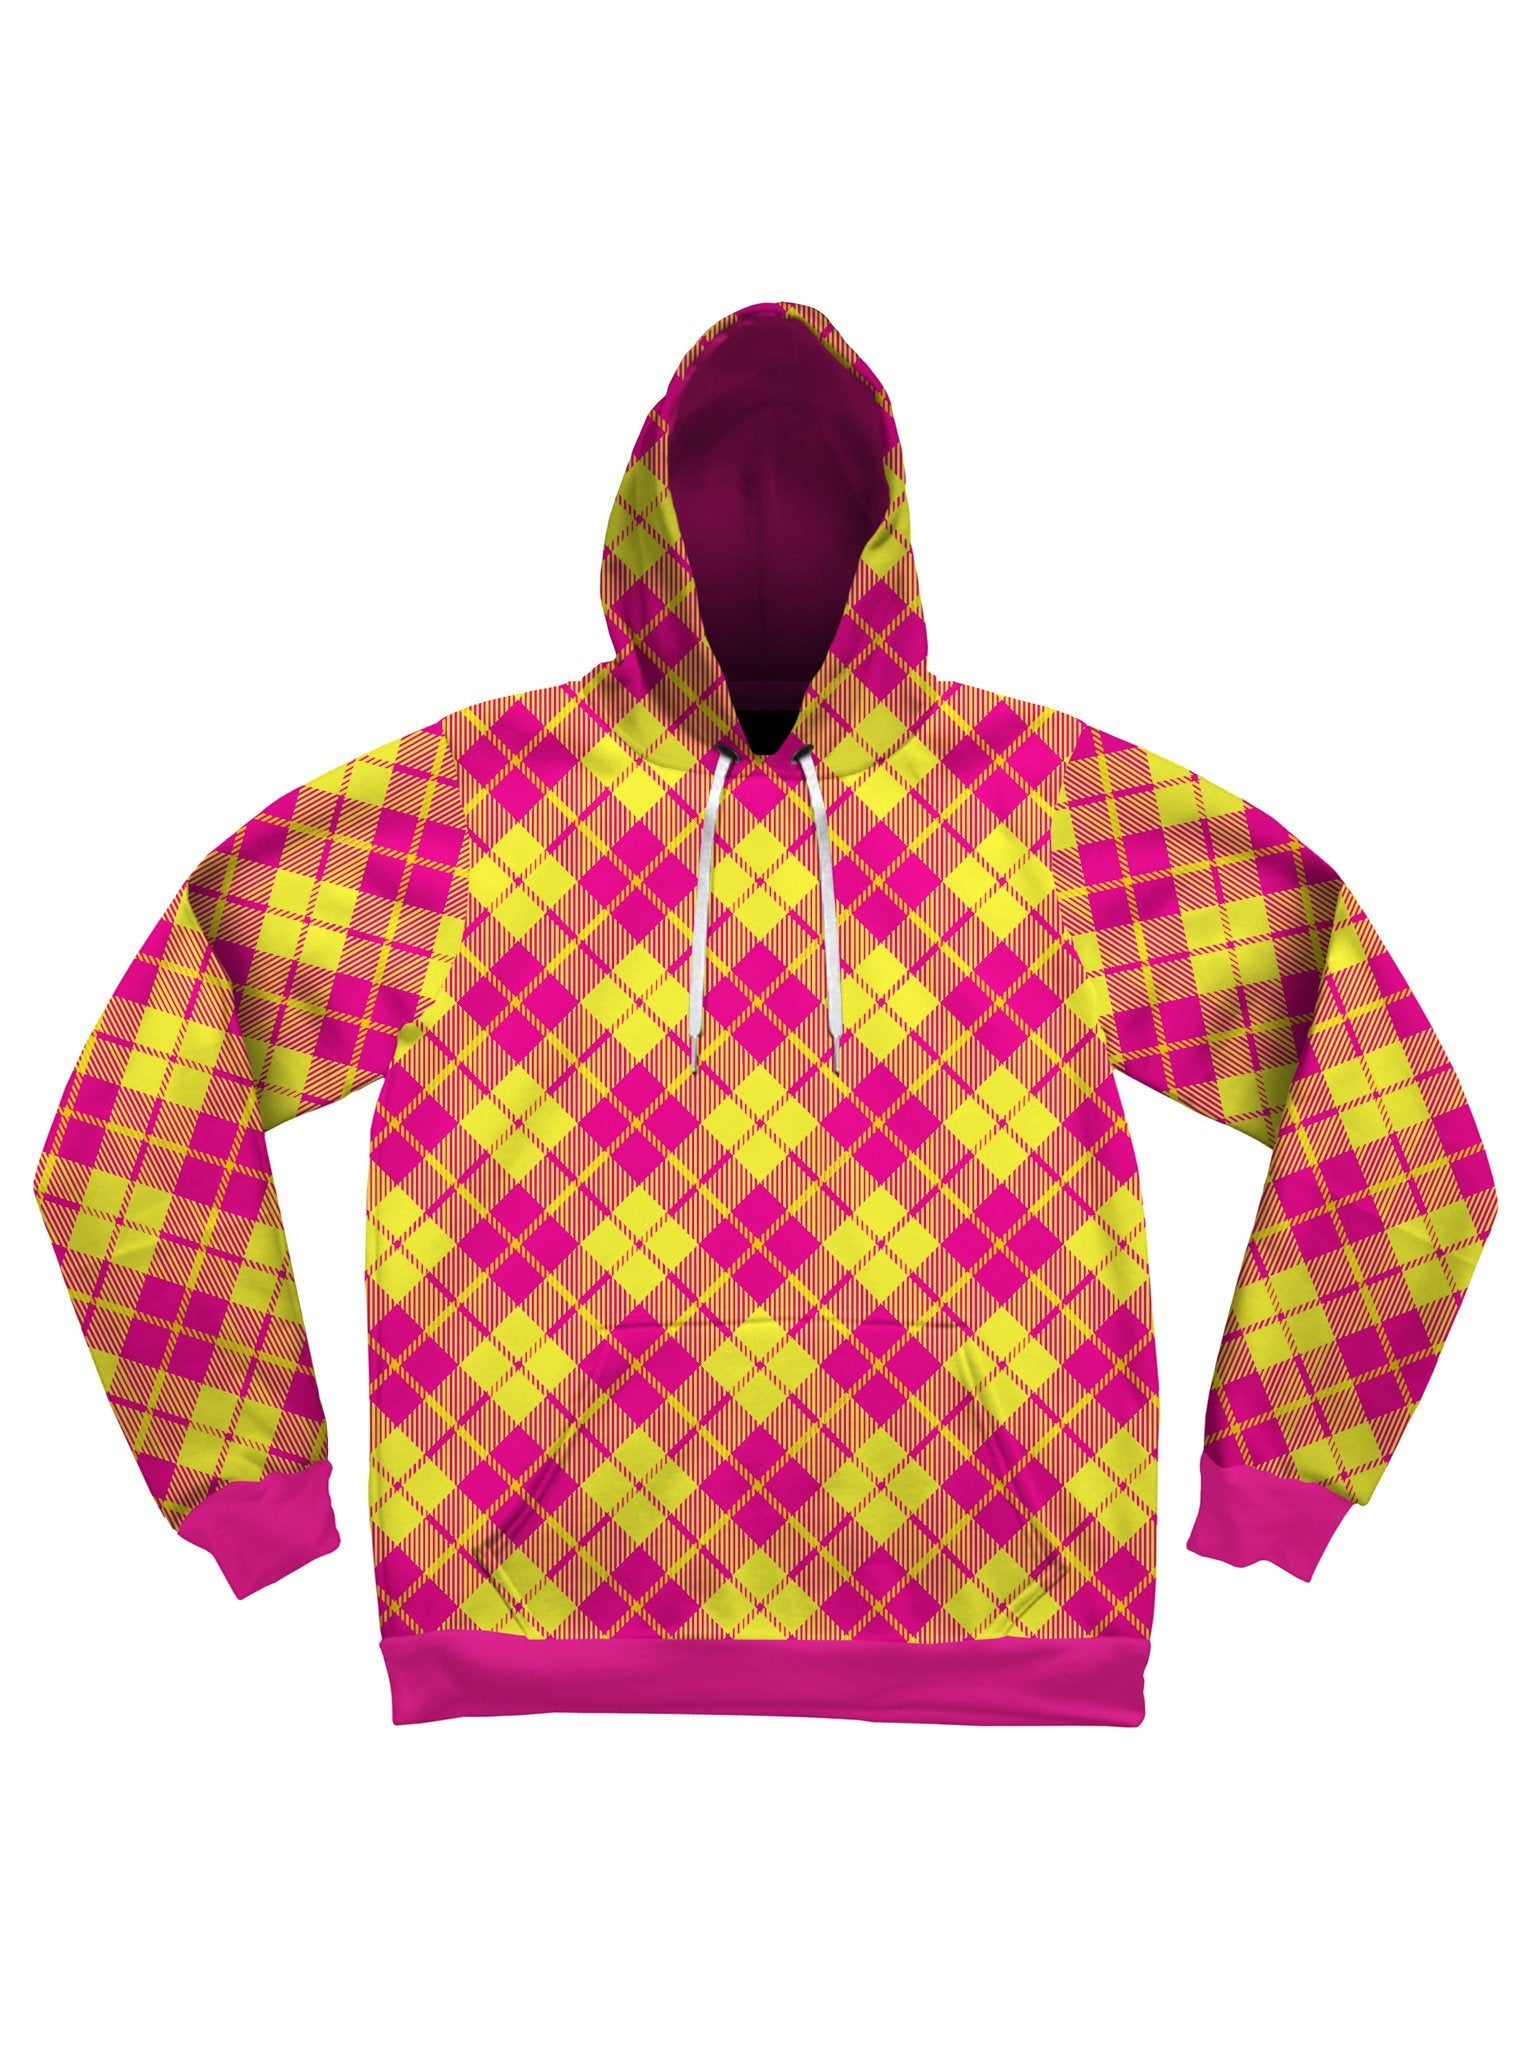 Neon Yellow & Pink Unisex Hoodie Pullover Hoodies Electro Threads 